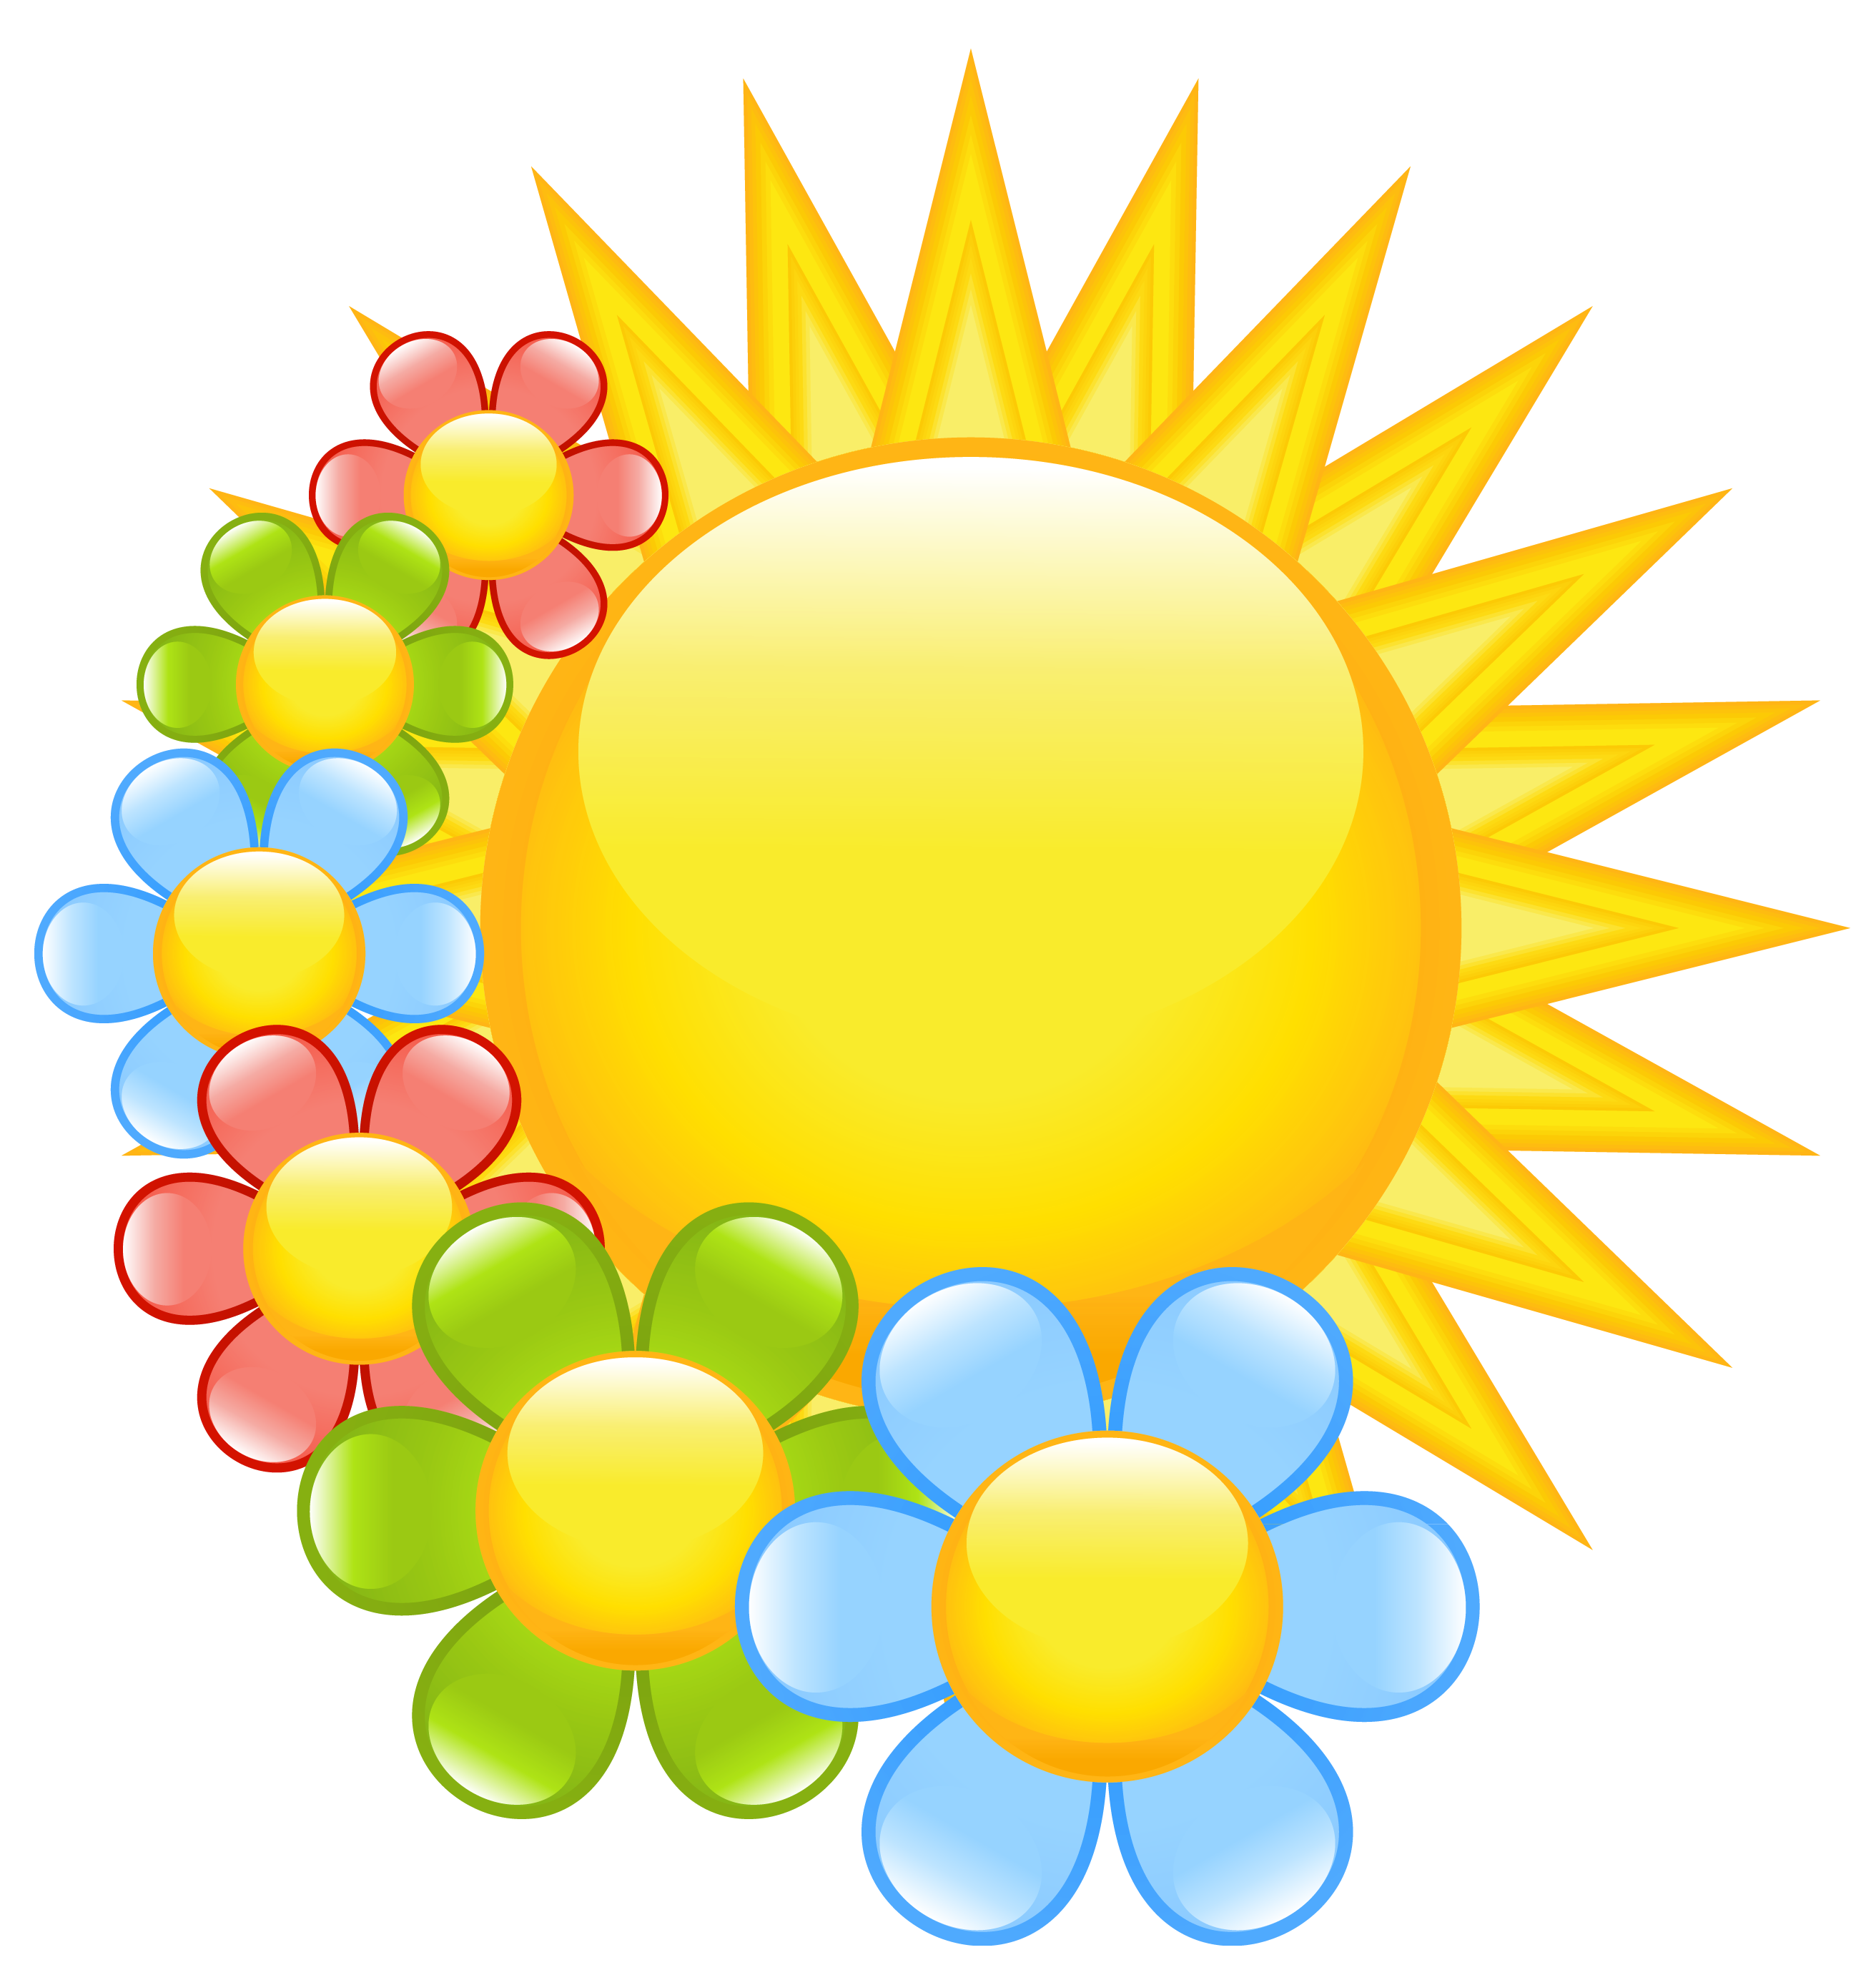 Spring sun with flowers clipart 0 clipartwiz